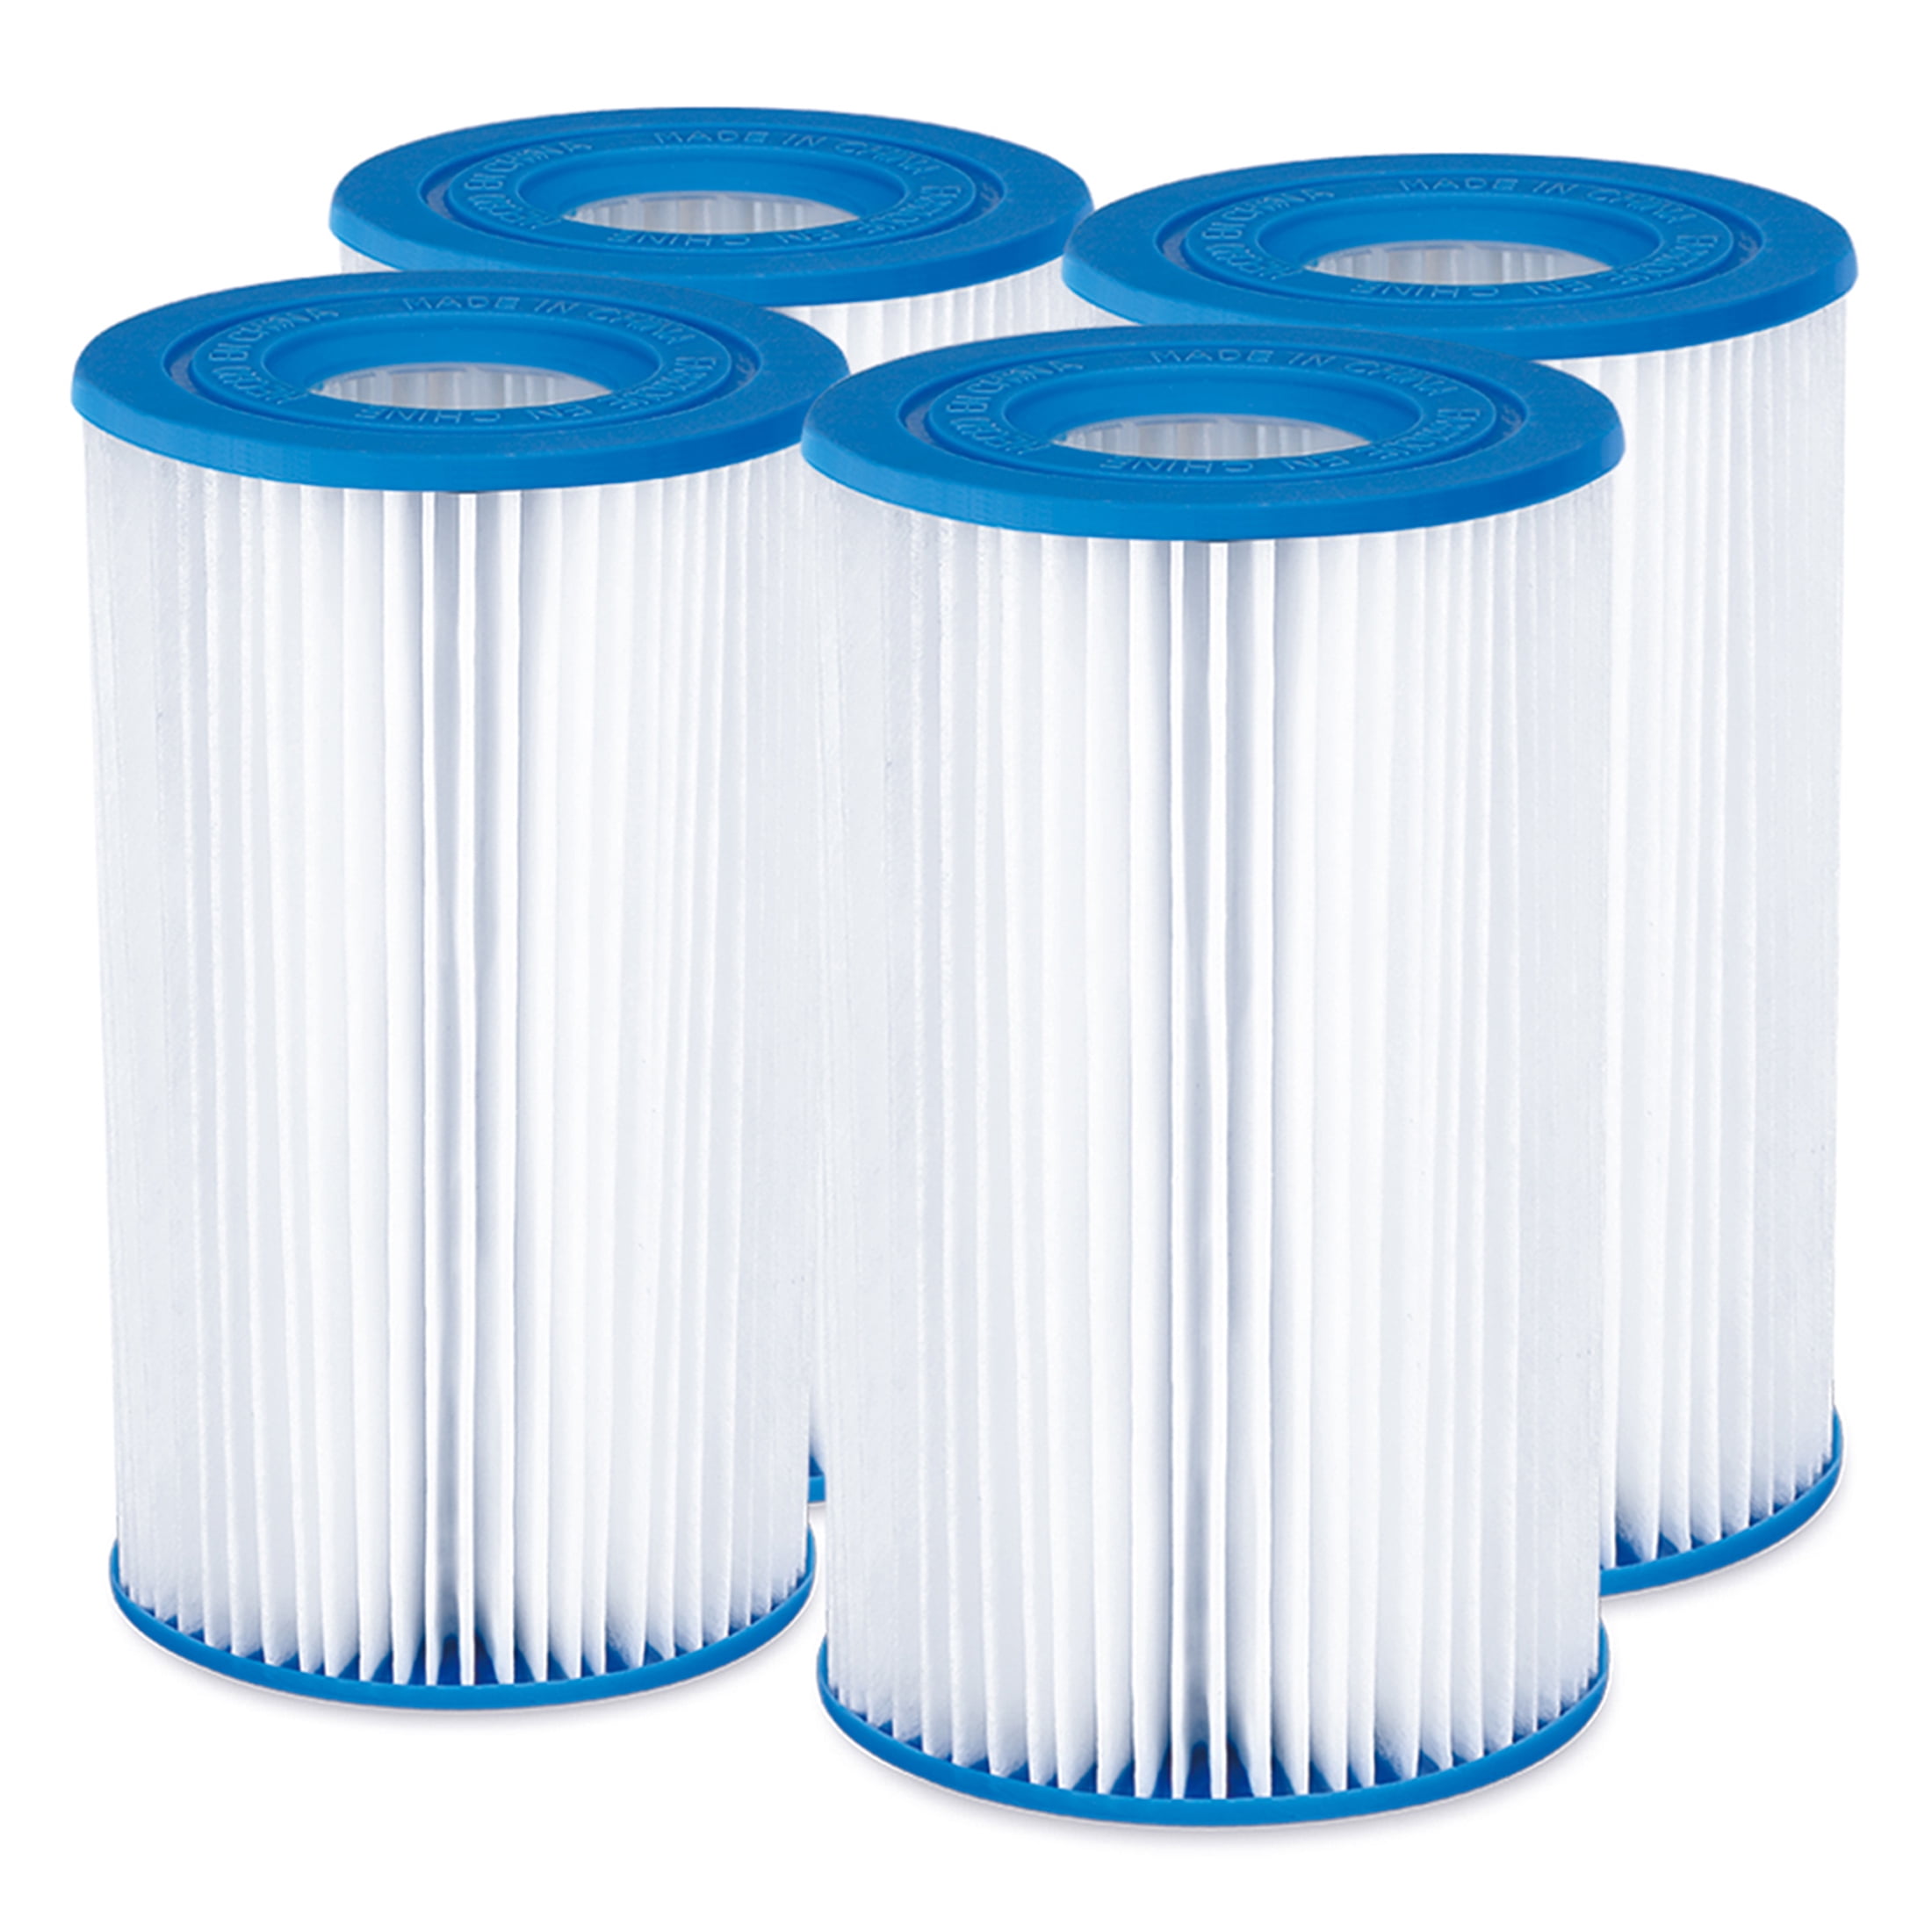 Funsicle Type A/C Filter Cartridge (4 Pack), White, Adults